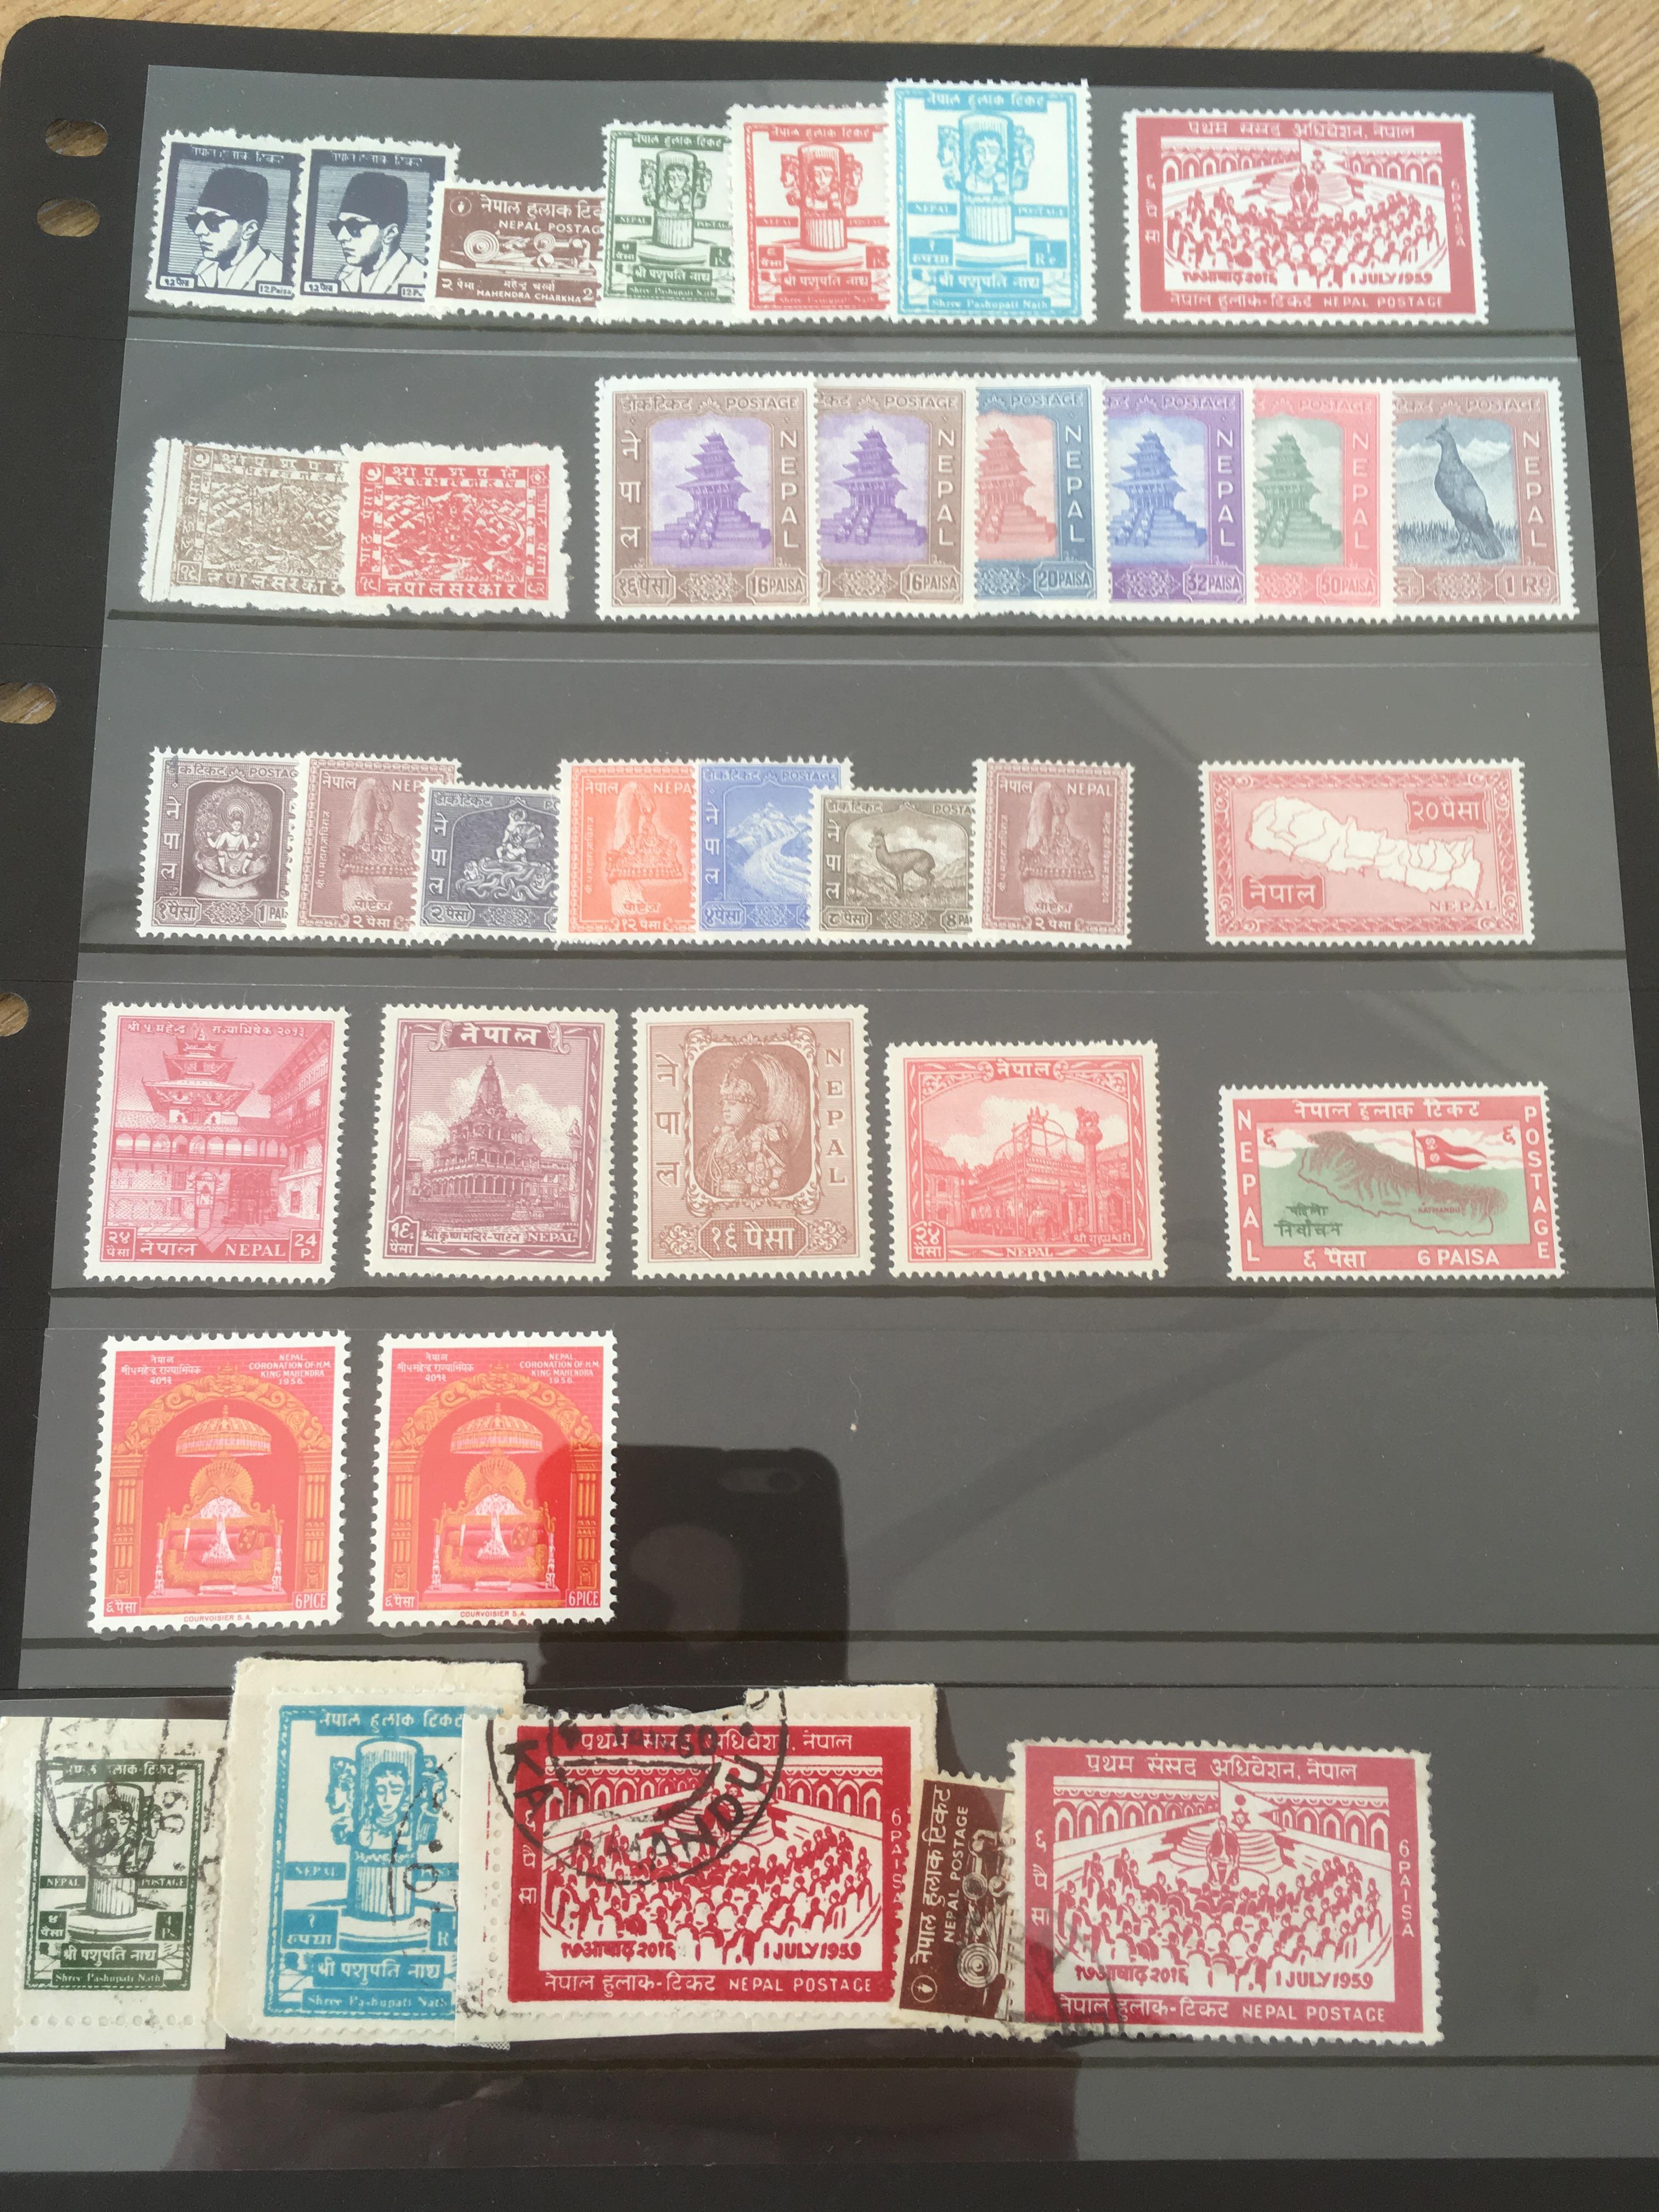 FILE BOX WITH ALL WORLD IN PACKETS AND ENVELOPES, SORTED BY COUNTRIES, ITALY, CHINA, MINT NEPAL, - Image 3 of 4